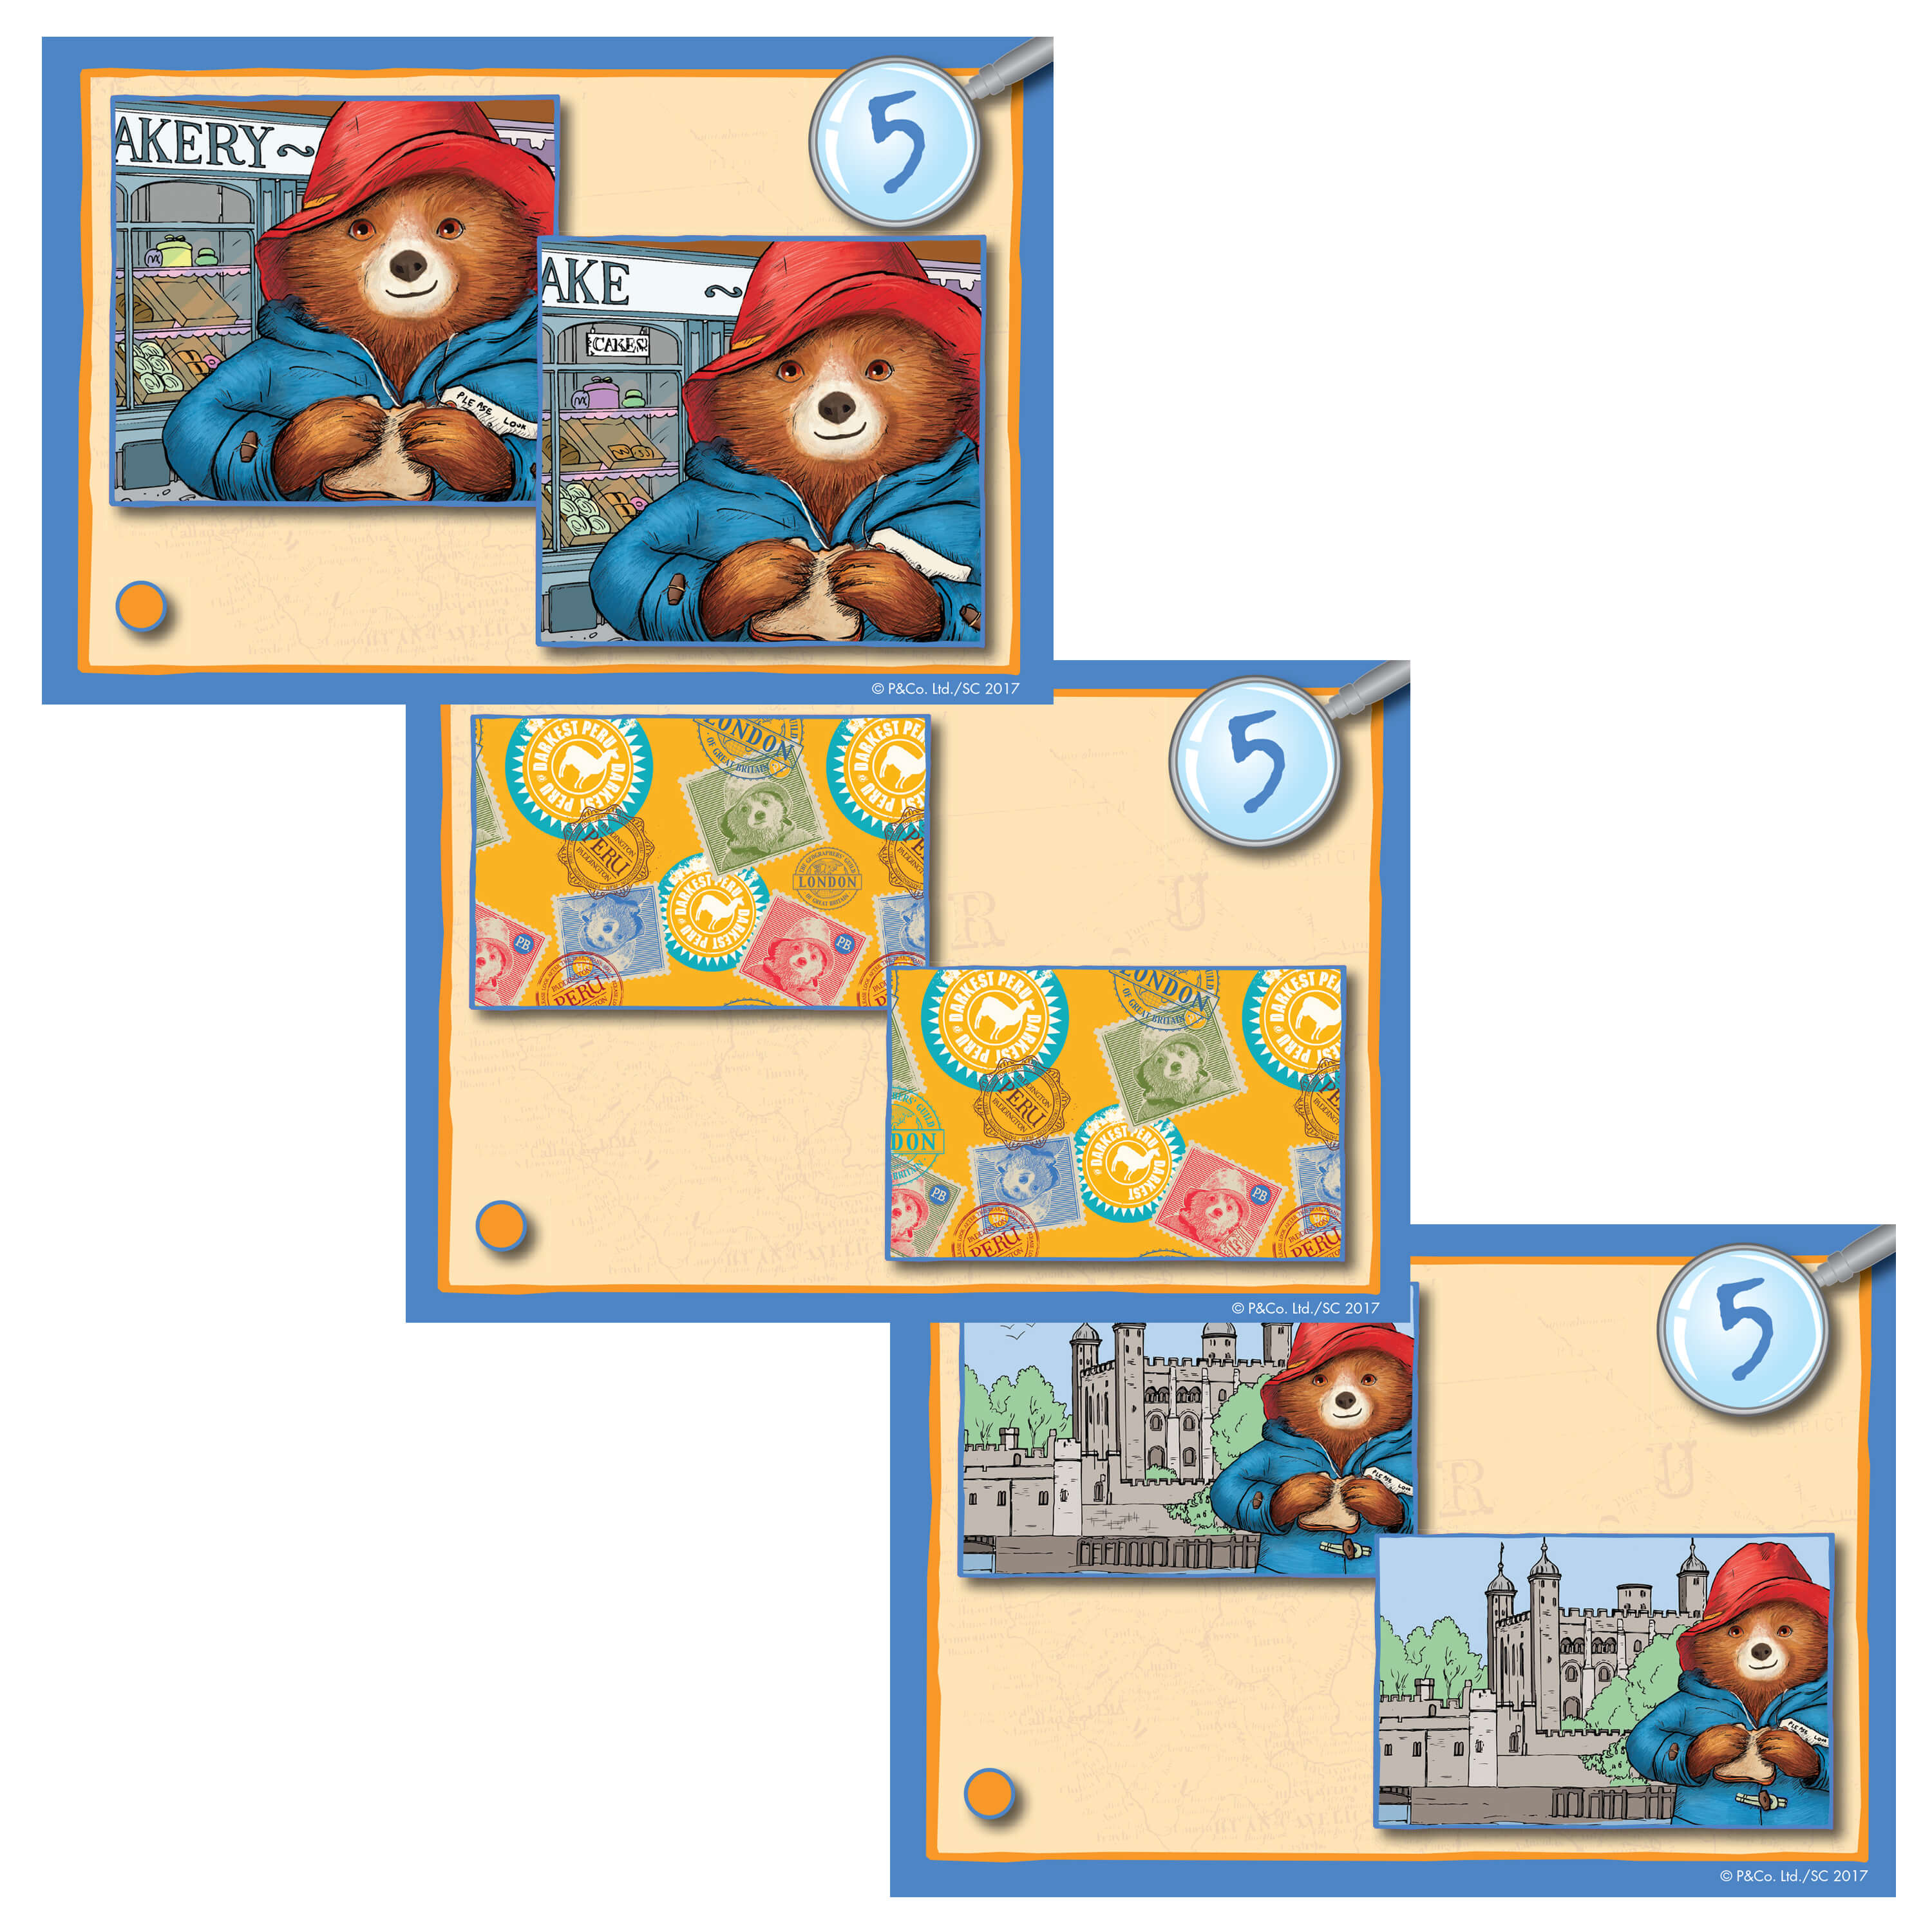 Interactive game for kids - Paddington Bear spot the difference game - University games